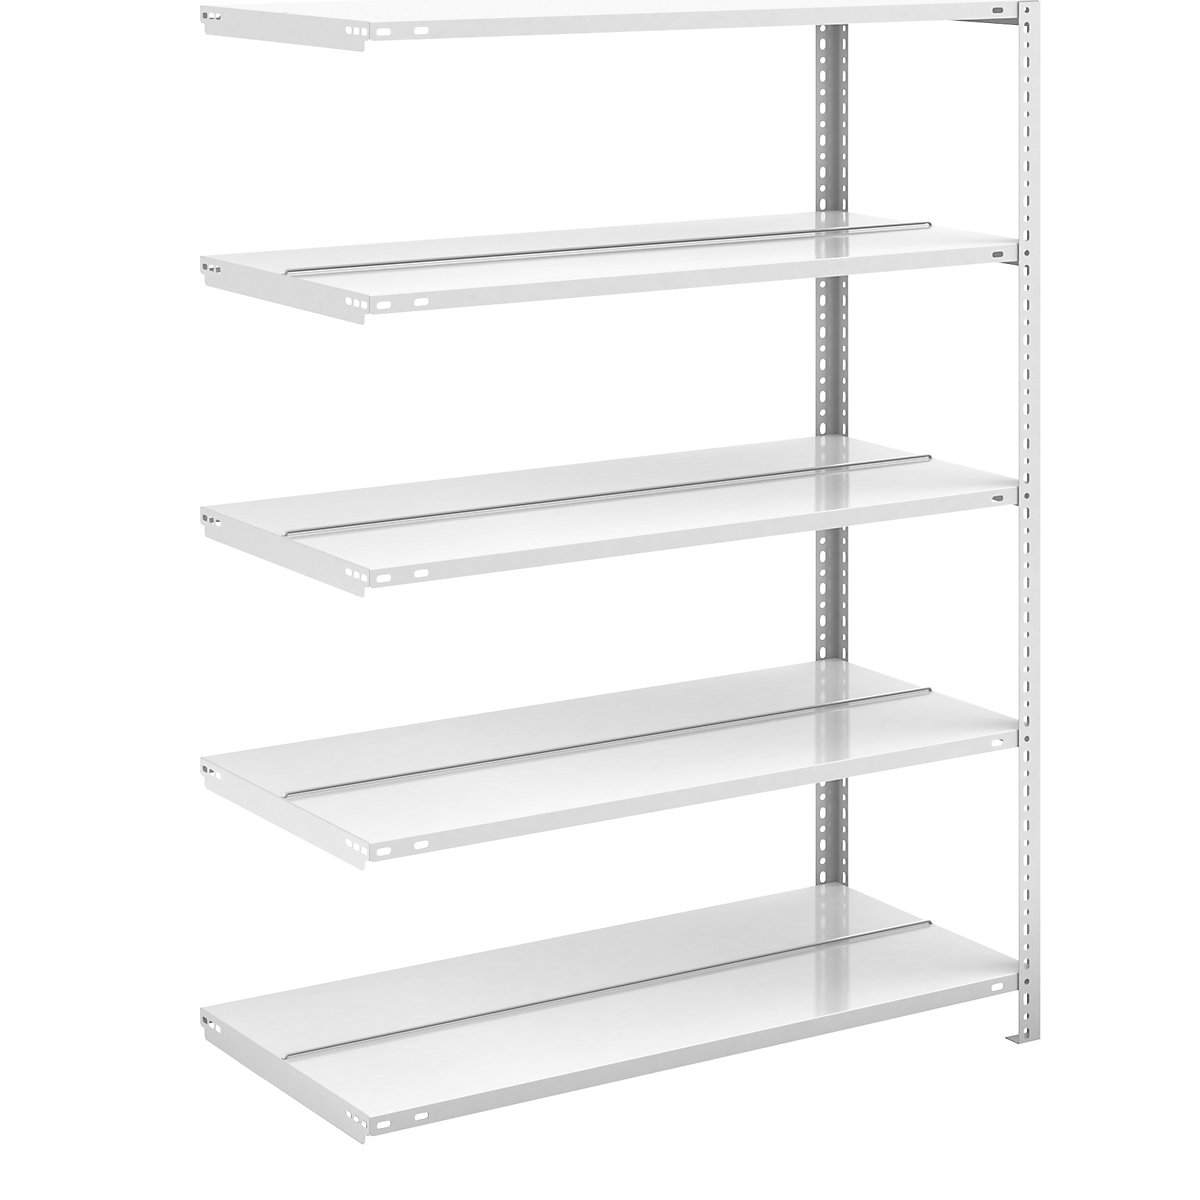 Bolt-together archive shelving, light grey RAL 7035 – hofe, shelf height 1500 mm, double sided, extension shelf, width x depth 1000 x 600 mm-5